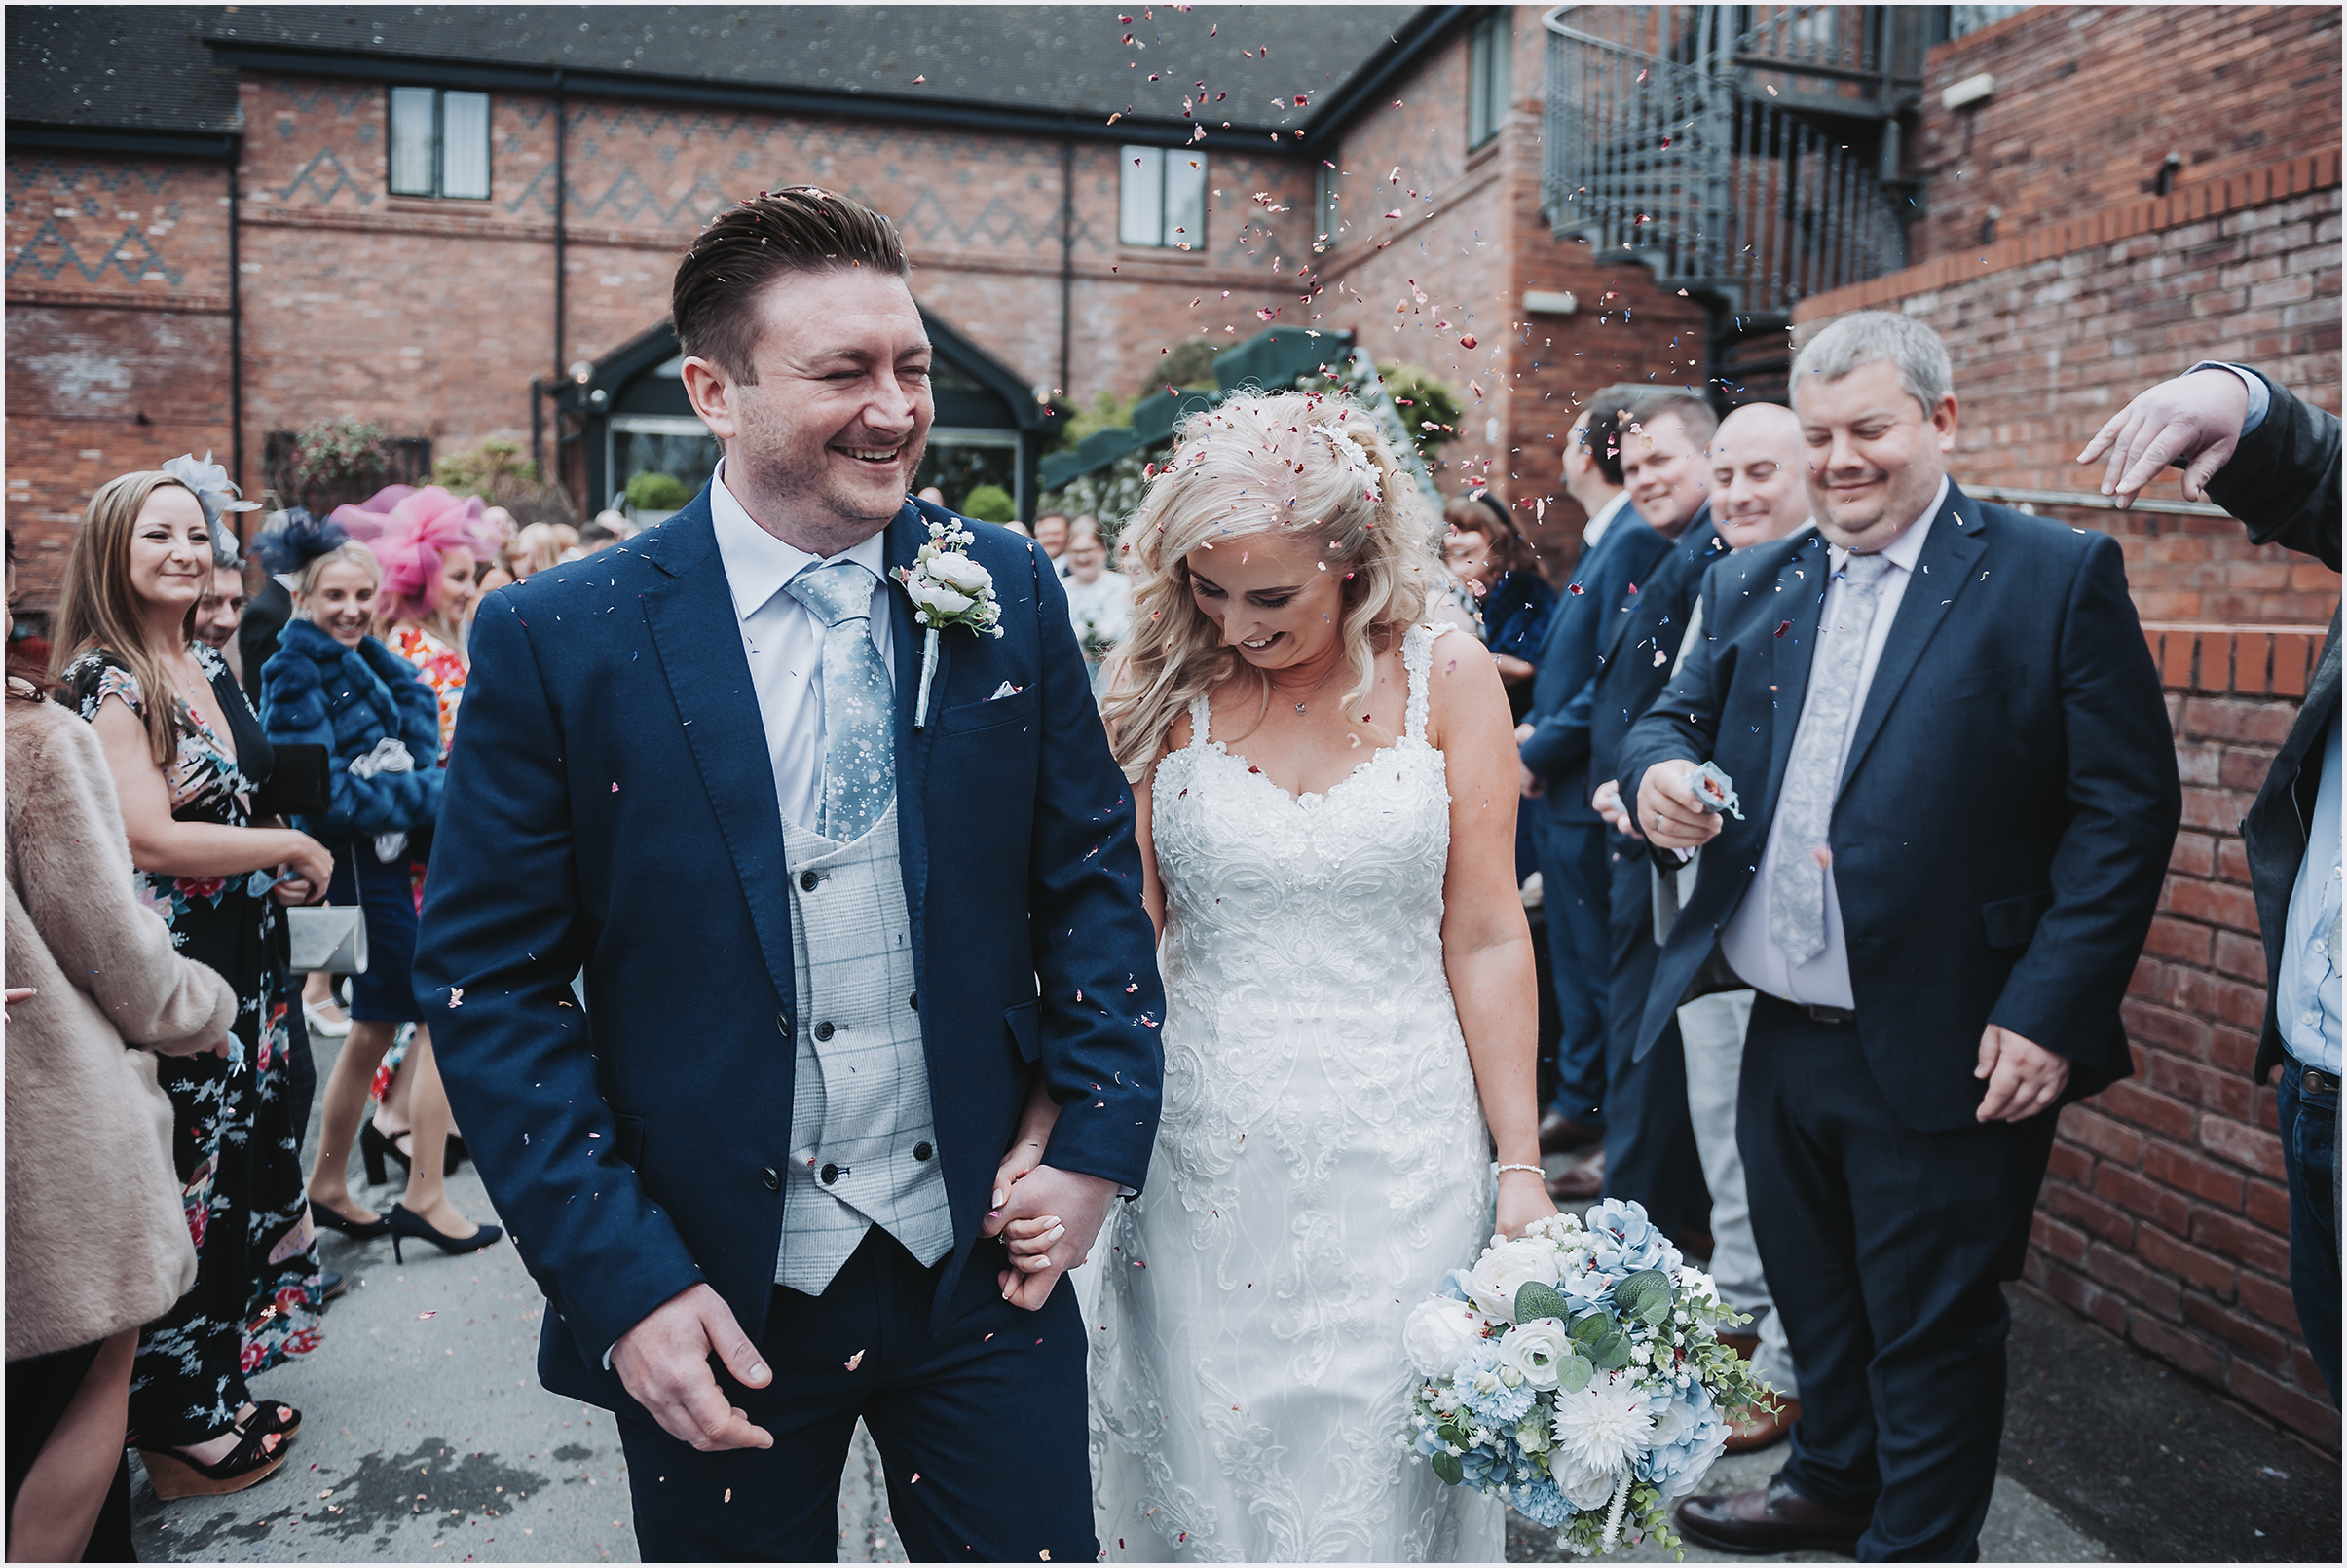 A newly married couple smile happily while confetti is thrown at them. Image captured by North Wales wedding Photographer Helena Jayne Photographer.